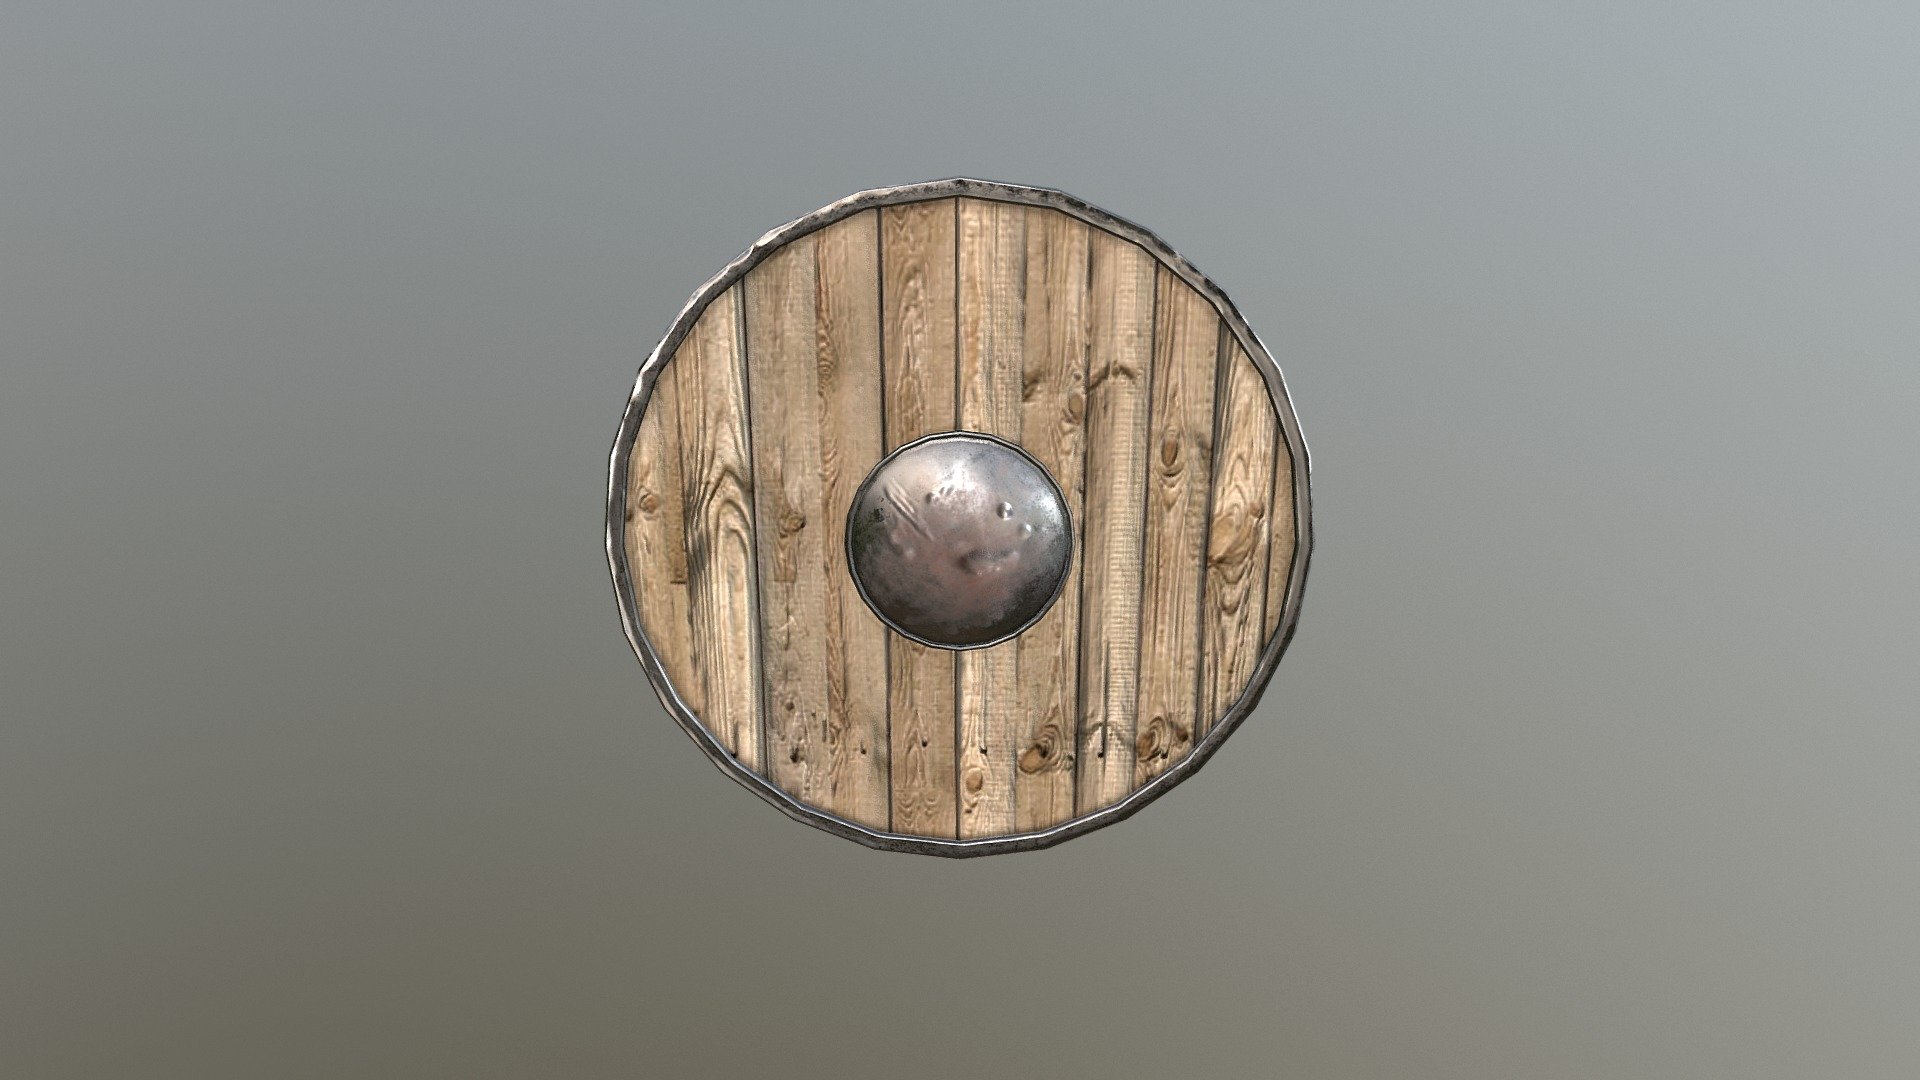 A very first and very basic model of mine. Decided to go with shield.

Made with Blender and Zbrush, Textured in Substance Painter 3d model